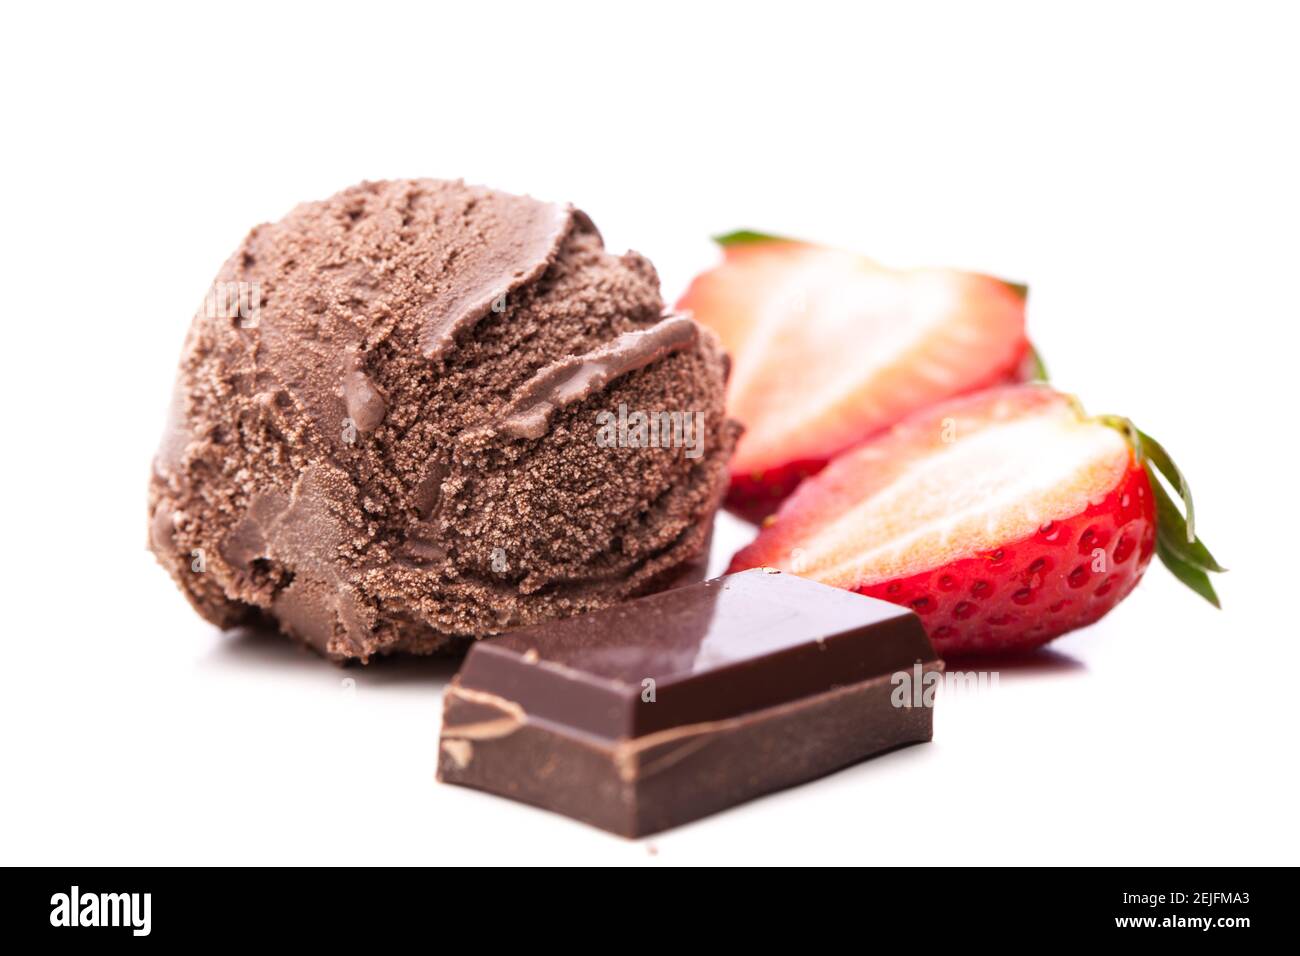 single chocolate ice cream scoop with chocolate and strawberry slices Stock Photo